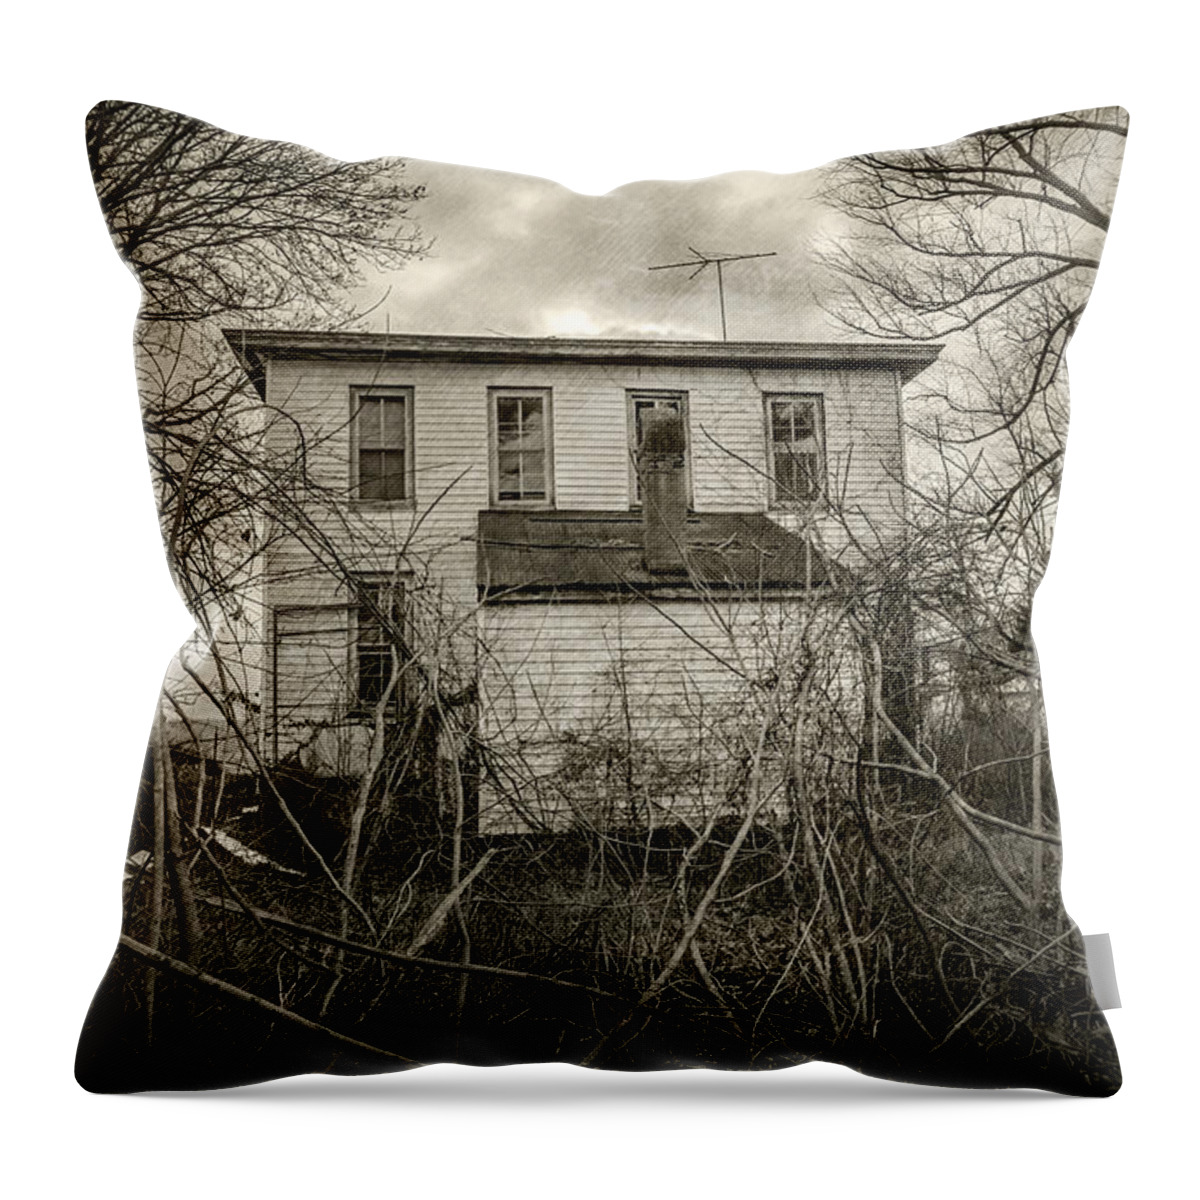 2d Throw Pillow featuring the photograph Seen Better Days by Brian Wallace